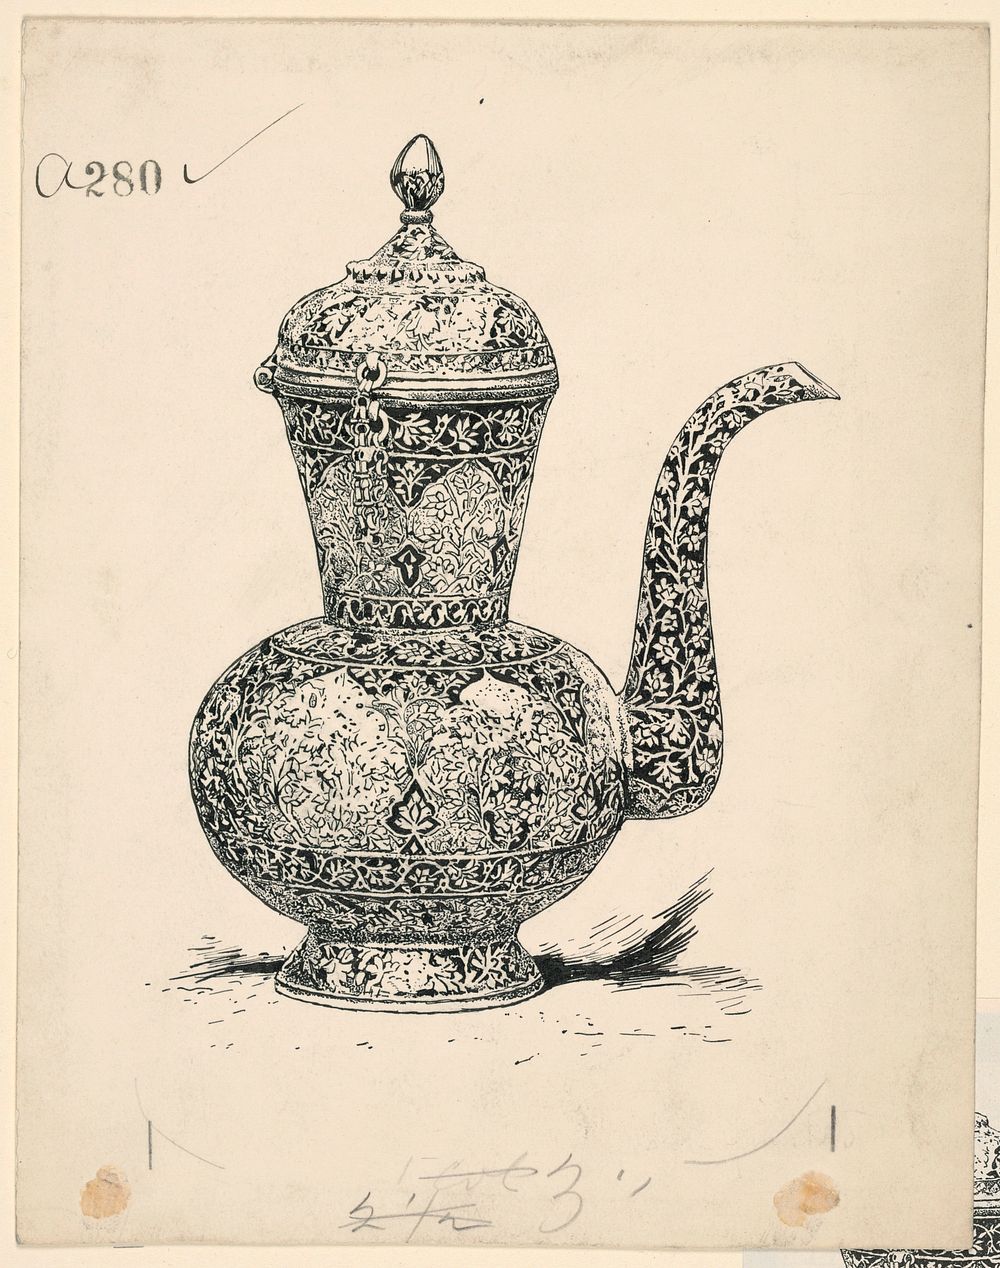 Ewer of Solid Silver made at Ispahan